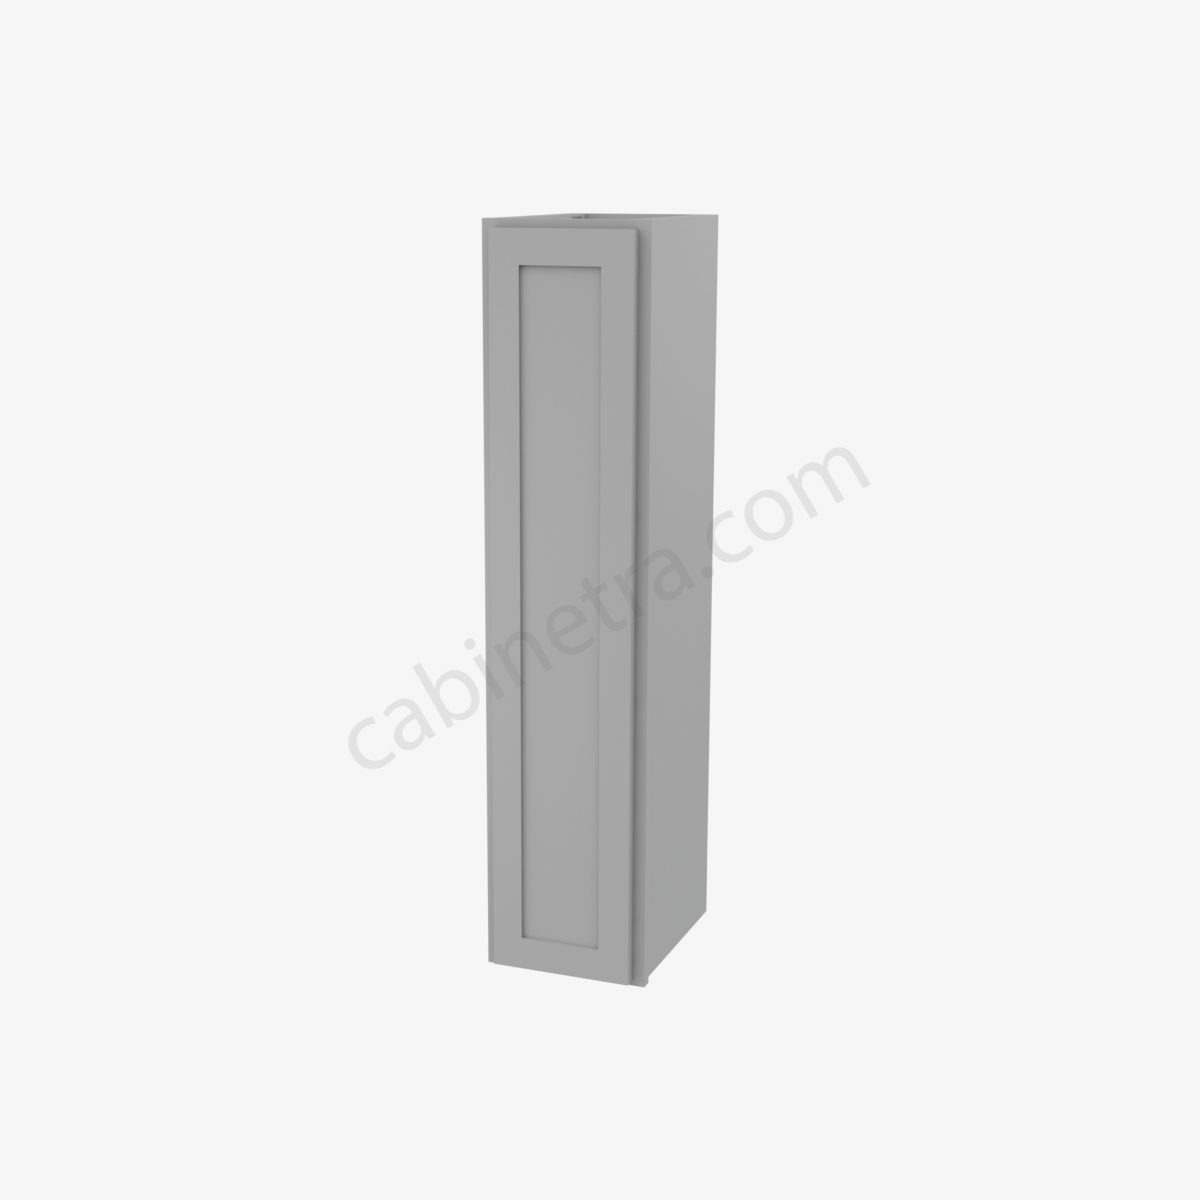 AB W0942 0 Forevermark Lait Gray Shaker Cabinetra scaled